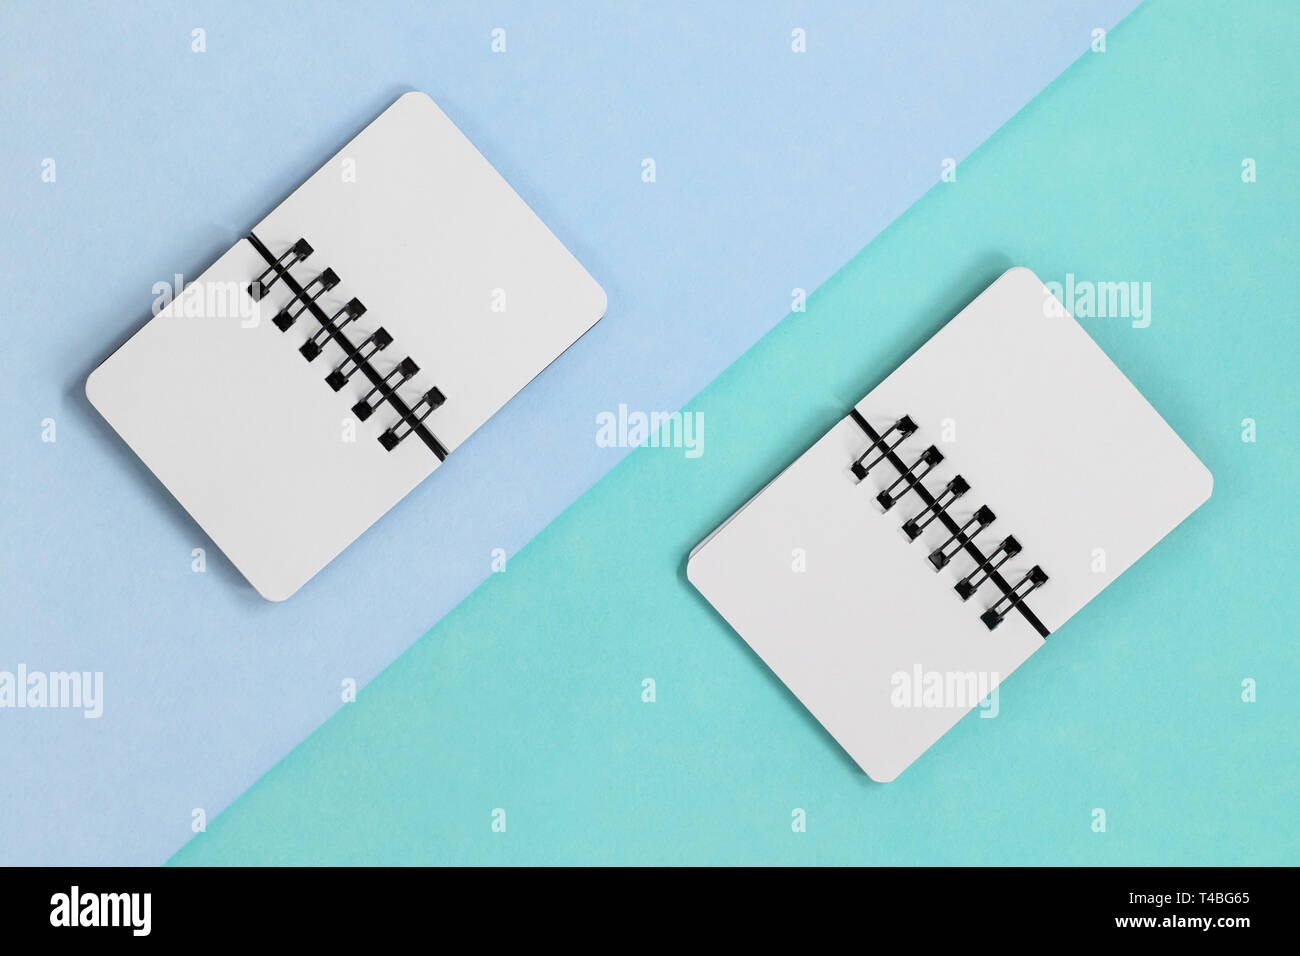 Two open paper spiral notebooks on a diagonal colored backround. Top flat lay view with blue green colors Stock Photo